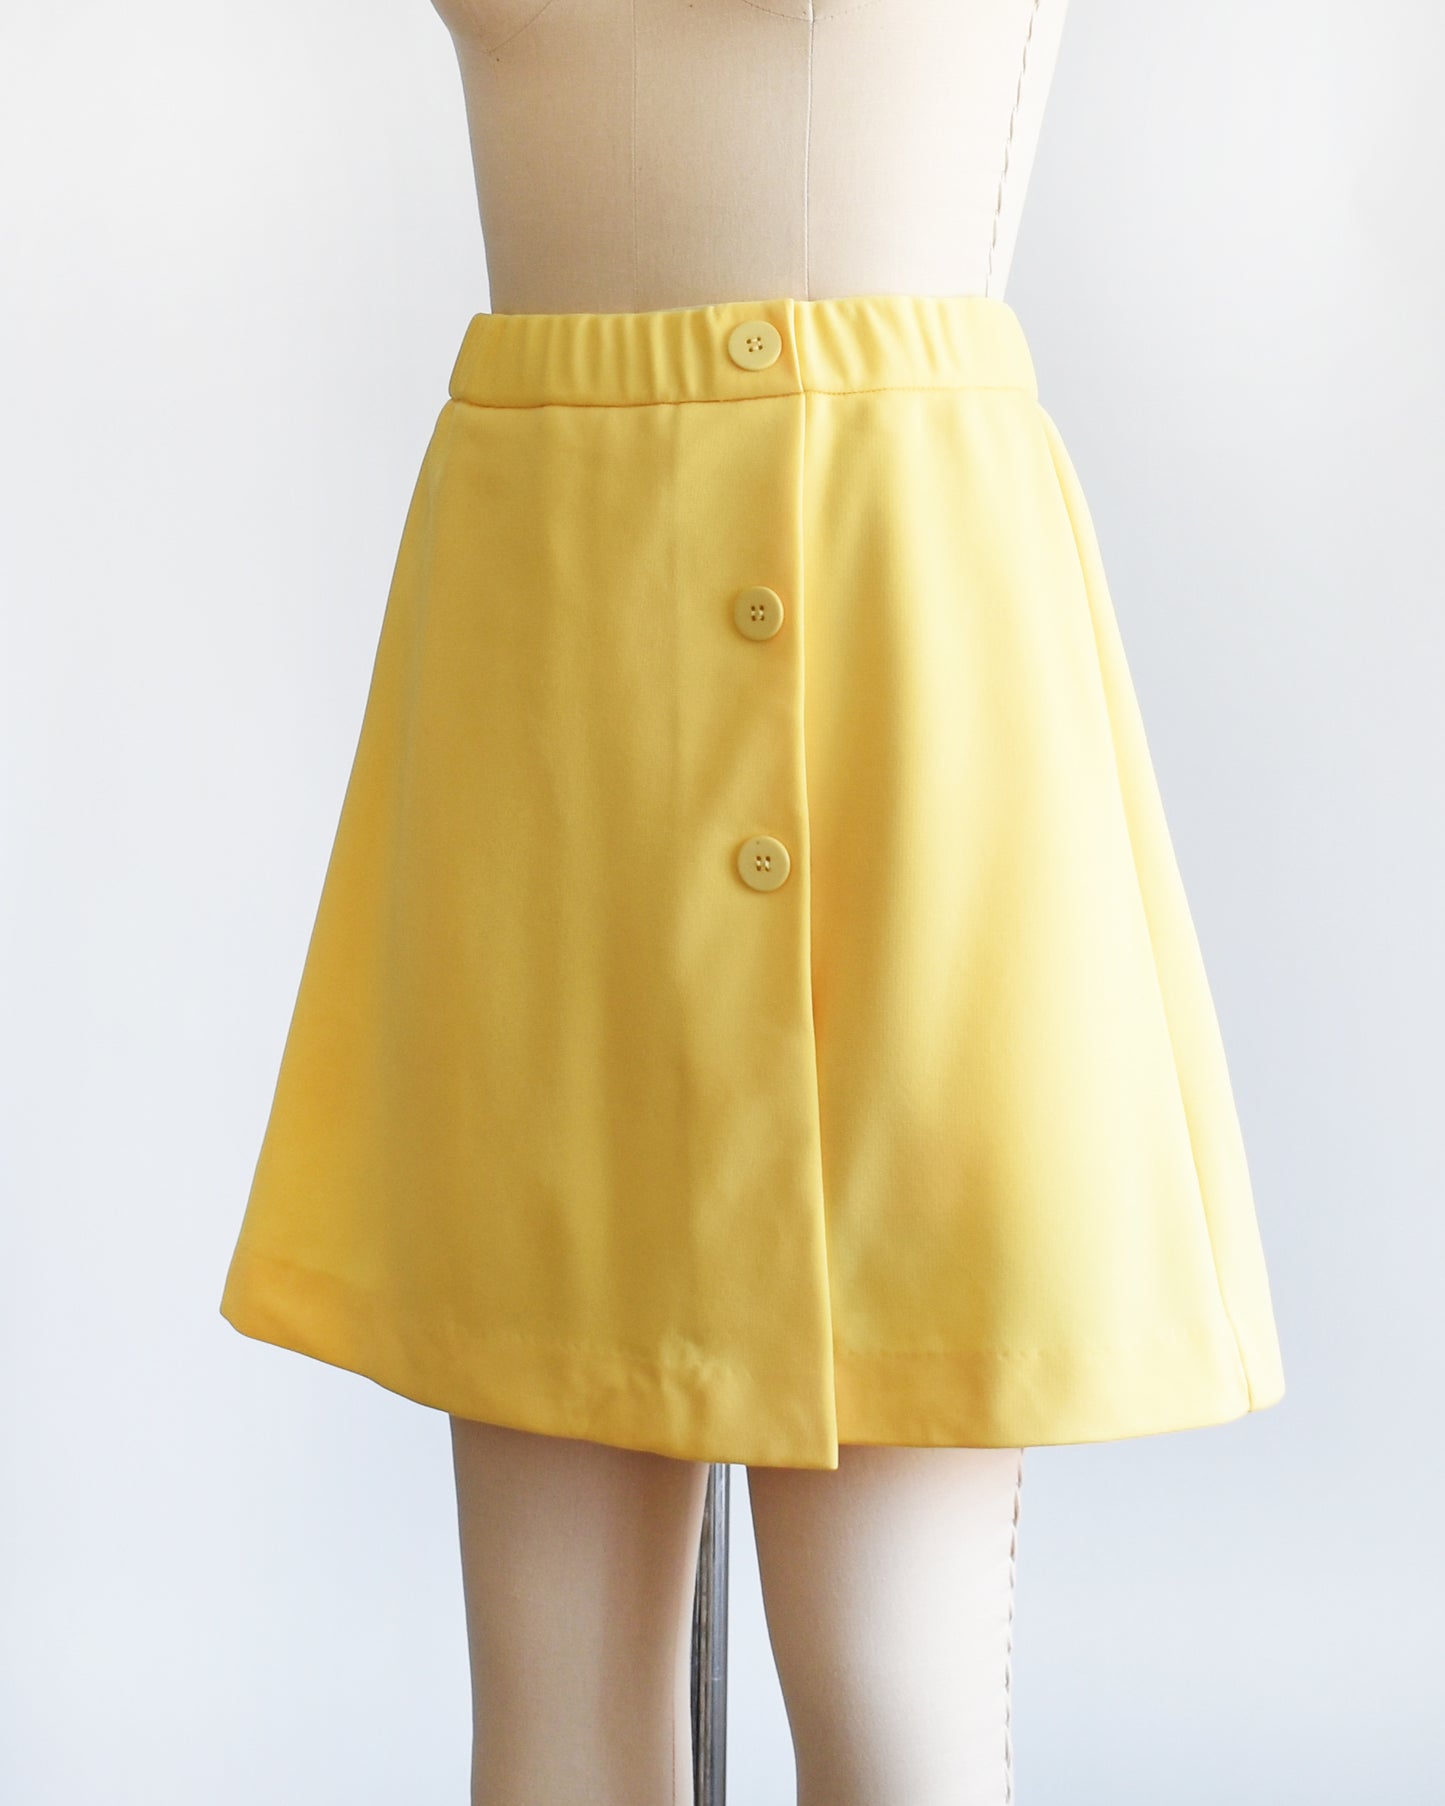 side front view of a vintage 1970s skort with three decorative buttons along the left side